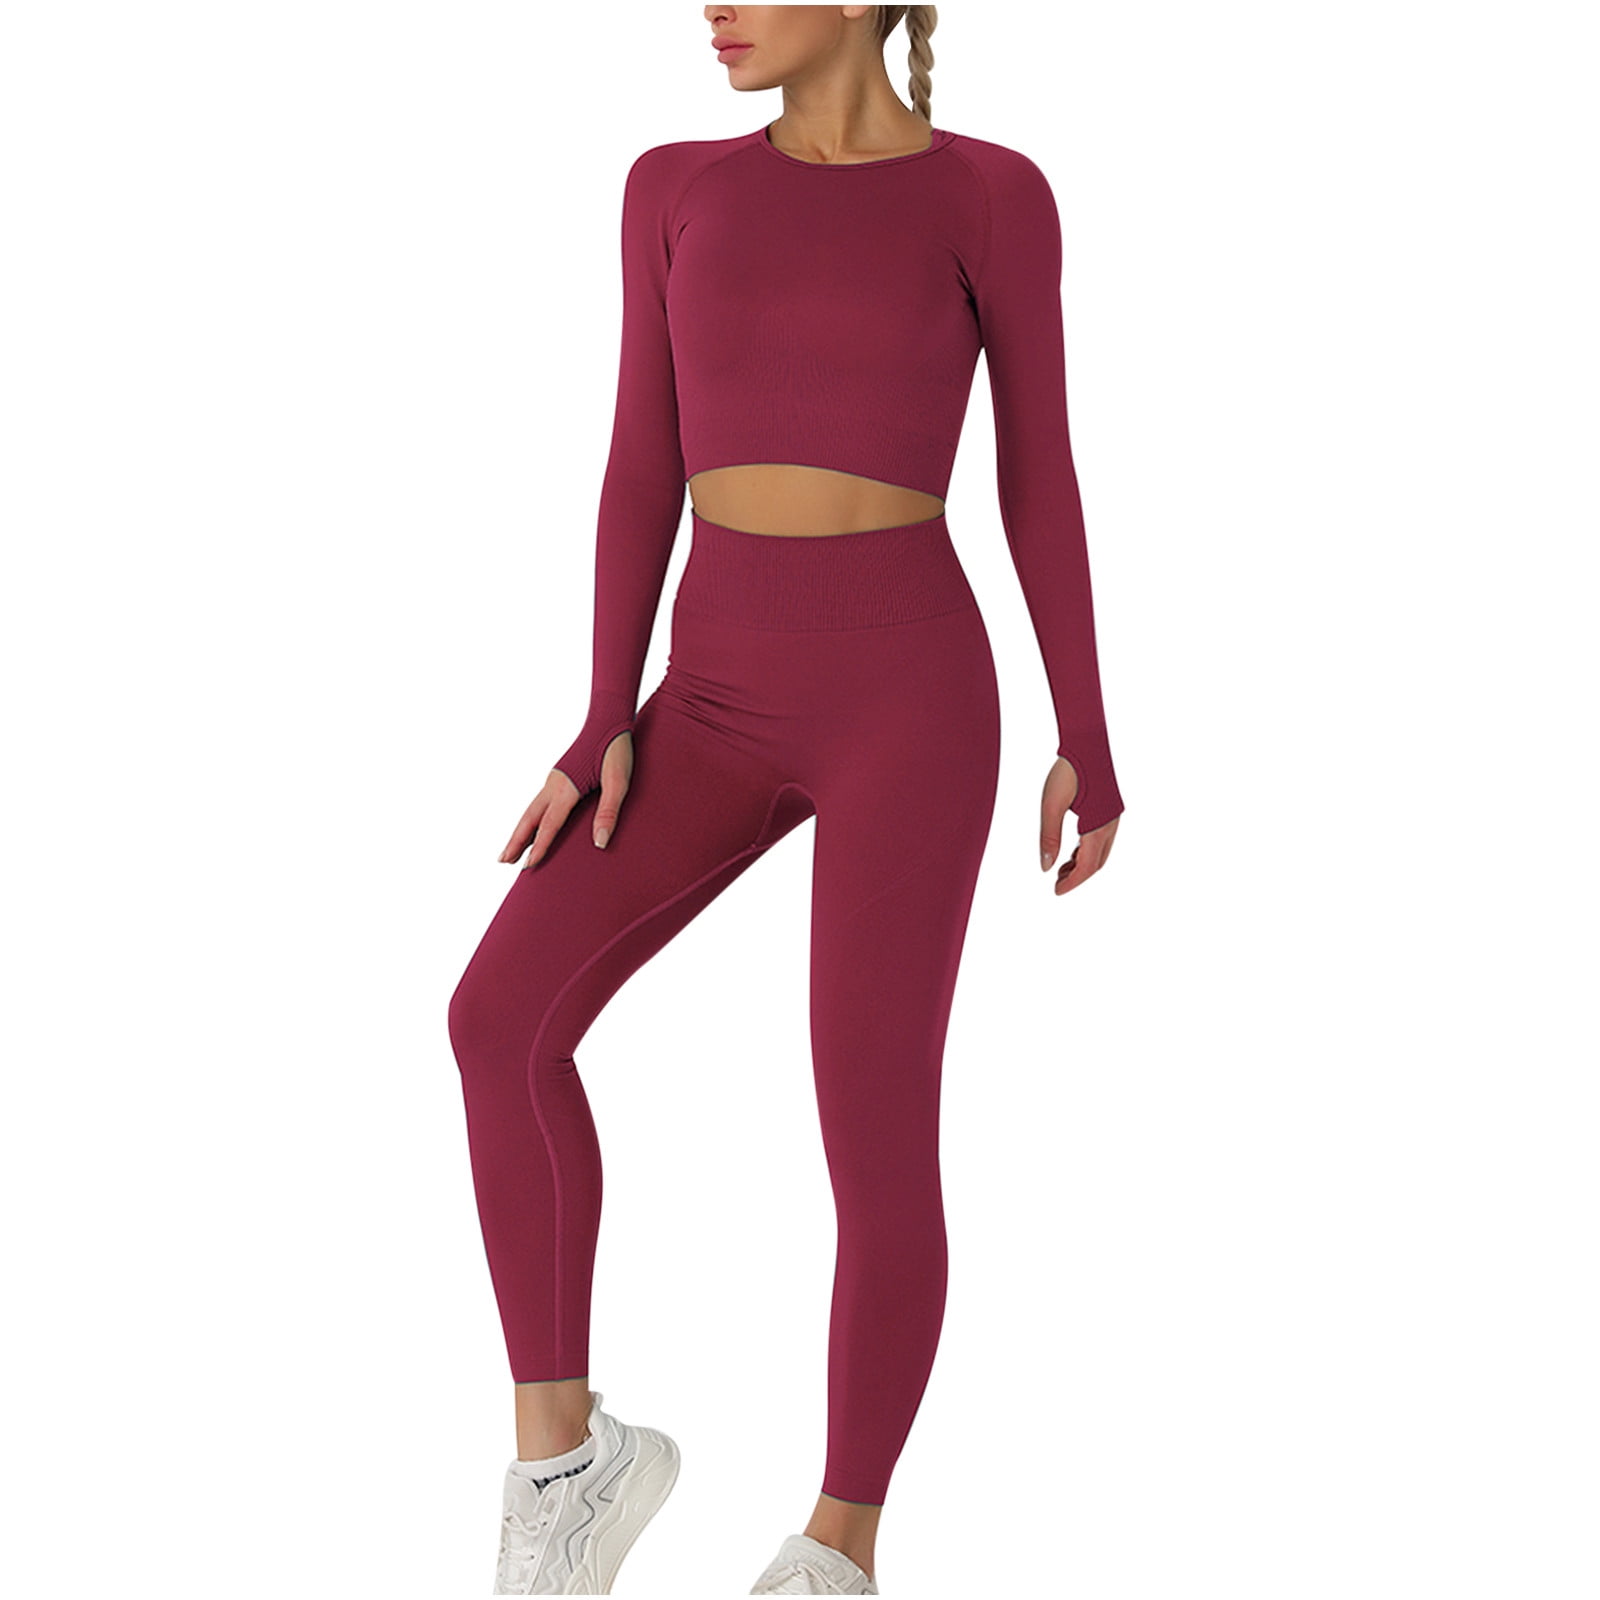  KARLYGASH High Waisted Workout Leggings for Women Fitness Yoga  Pants with Pockets Non-See-Through Running Girl Exercise Clothes Burgundy :  Clothing, Shoes & Jewelry